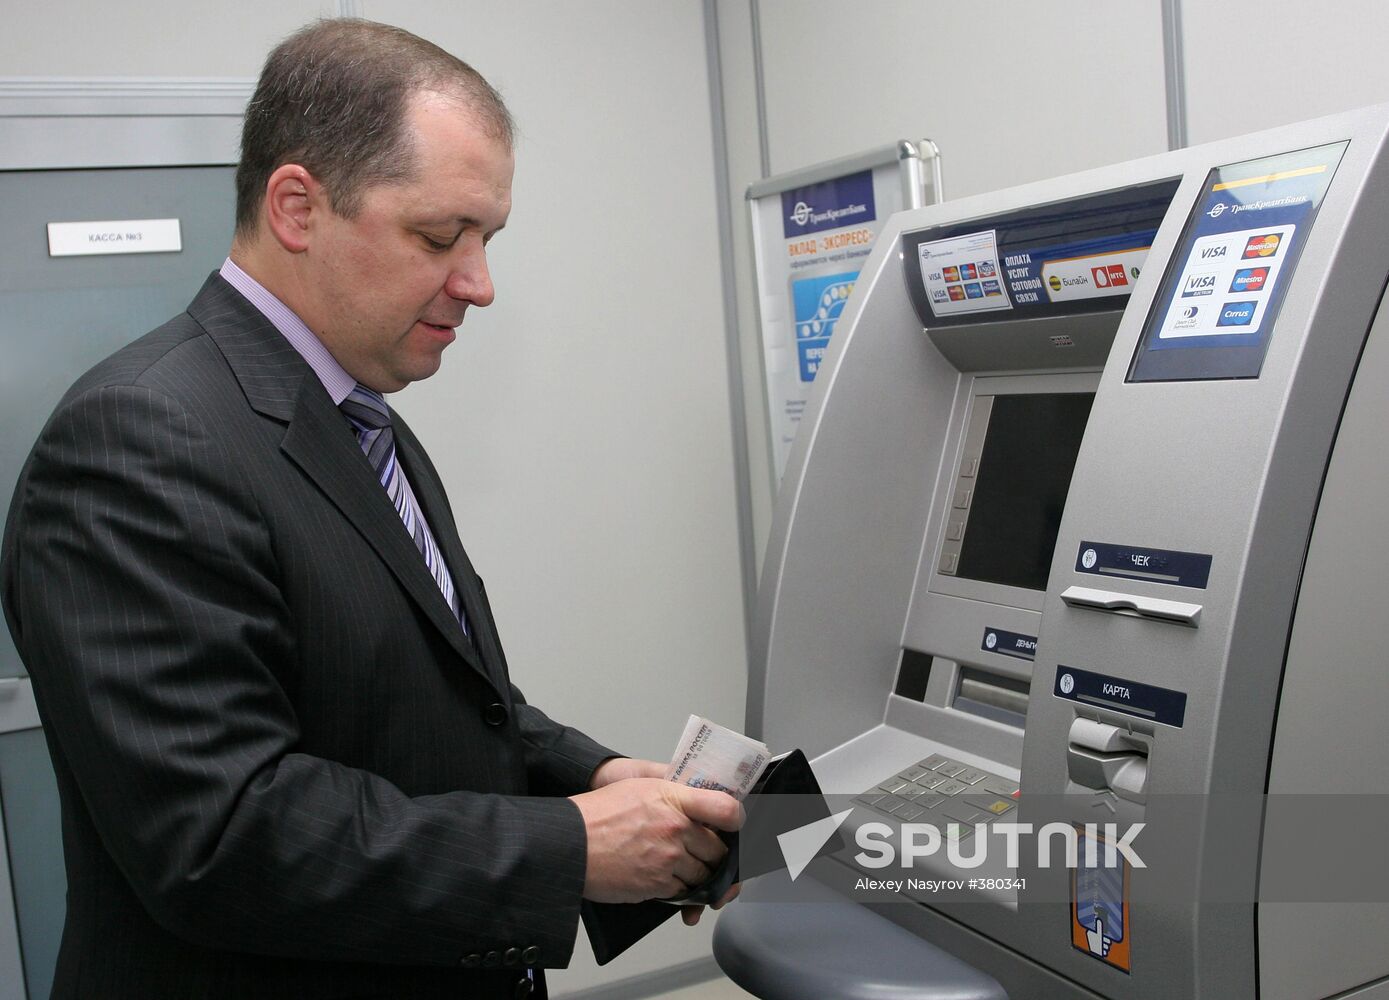 Cash withdrawal from a TransCreditBank ATM